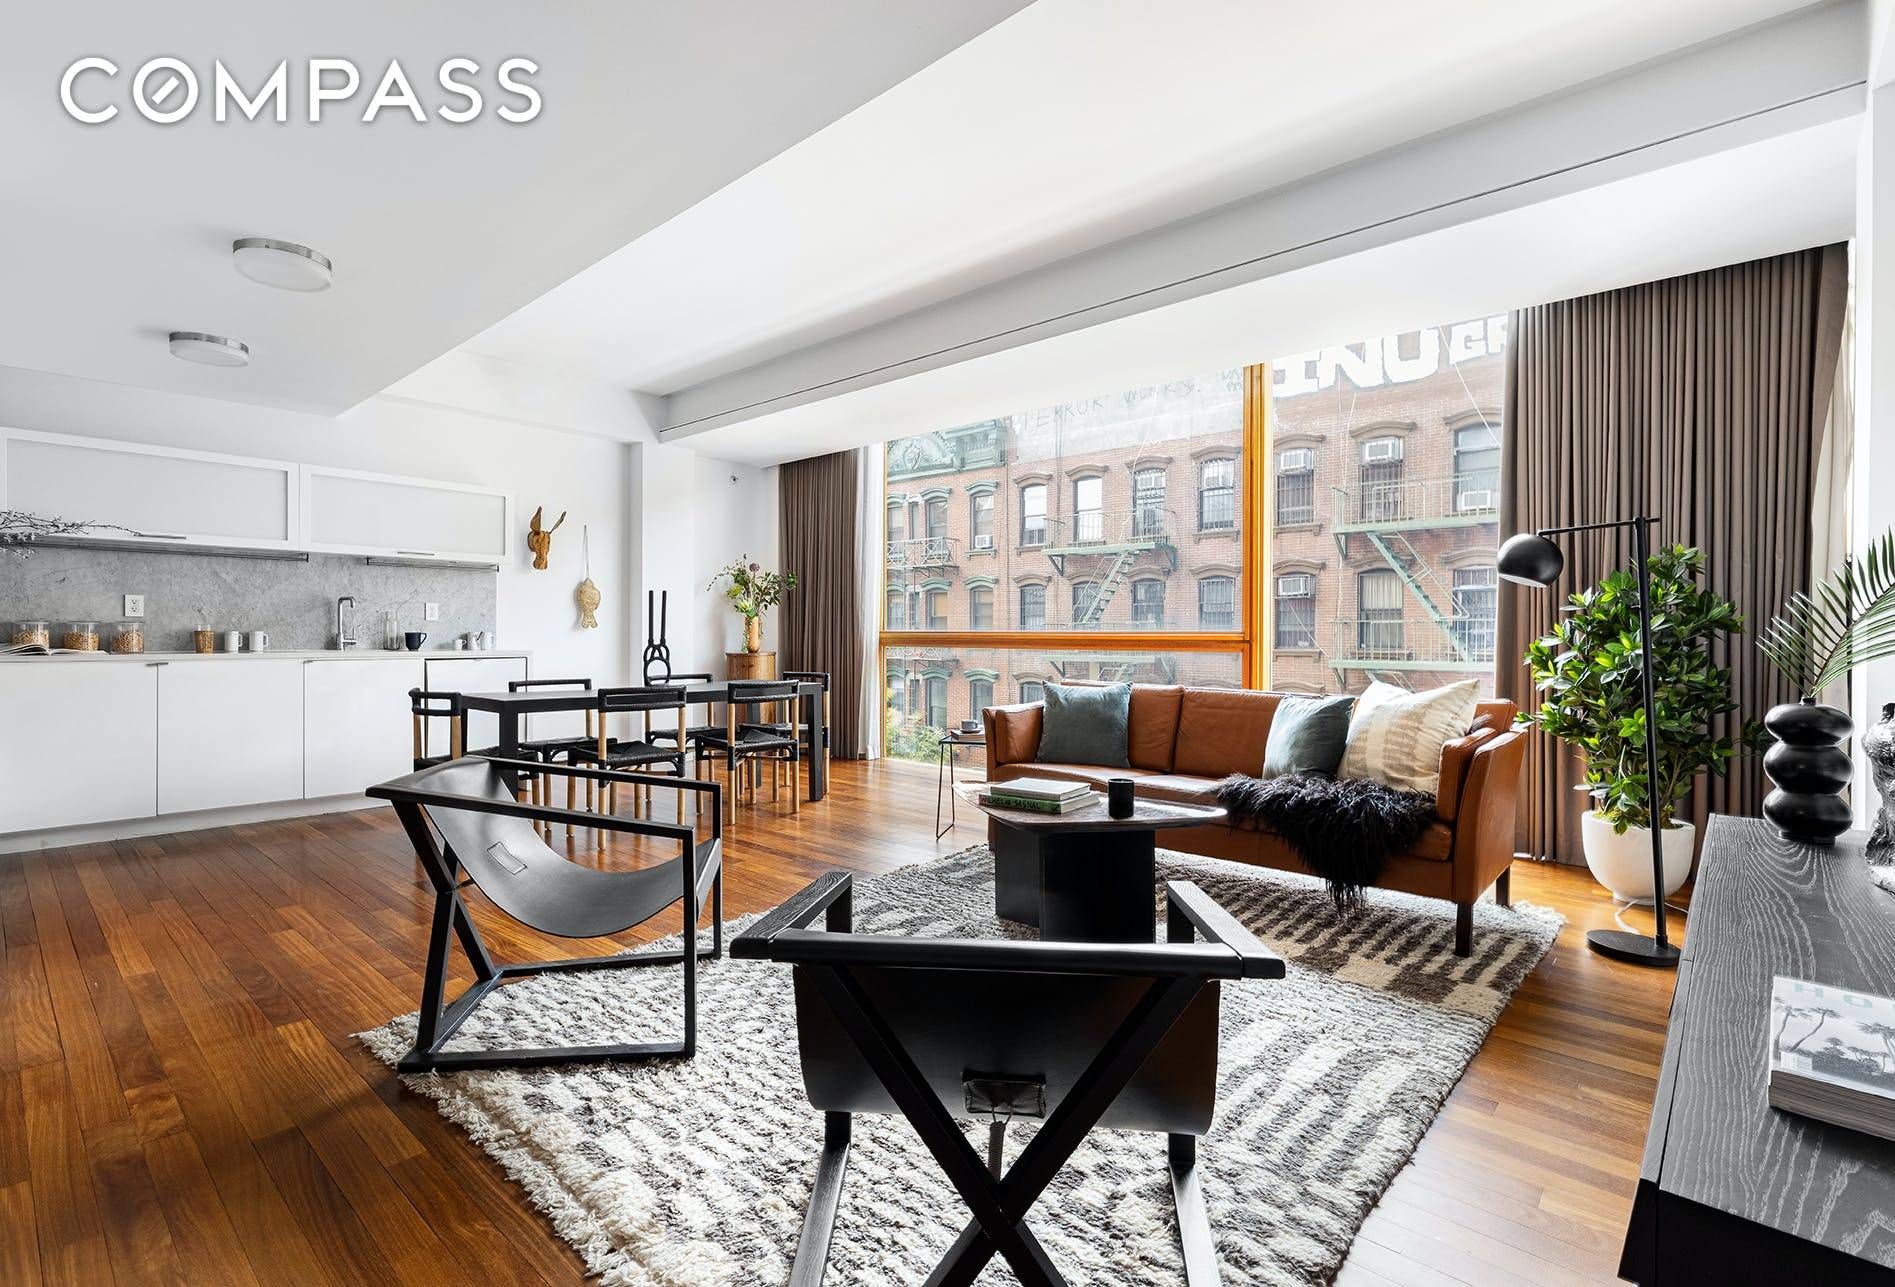 Chic full floor 1, 235 SF two bedroom, two bathroom condominium loft with a private balcony in the heart of the Lower East Side.